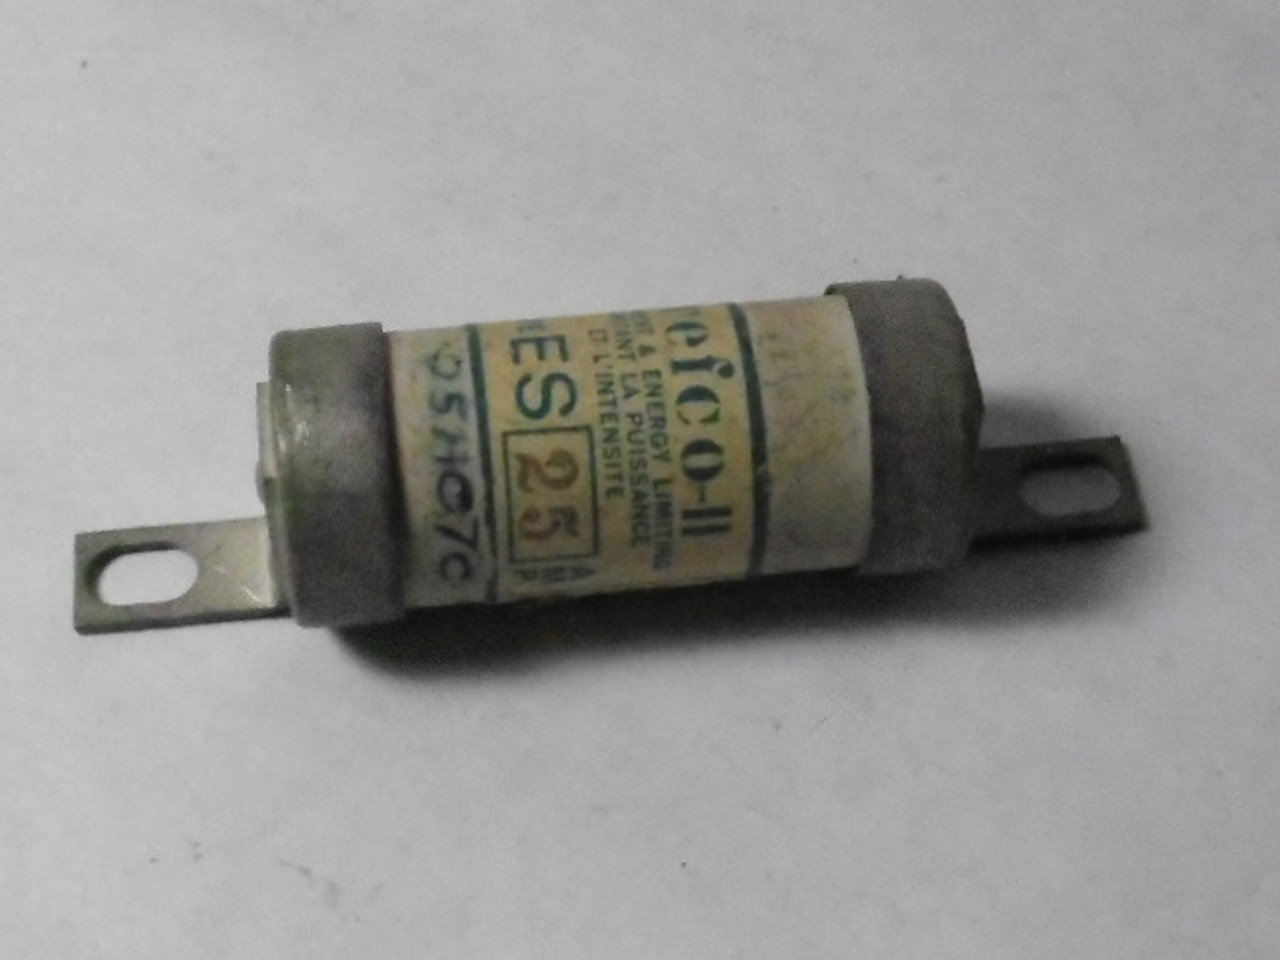 Cefco ES25 Current & Energy Limiting Fuse 25A 600V USED